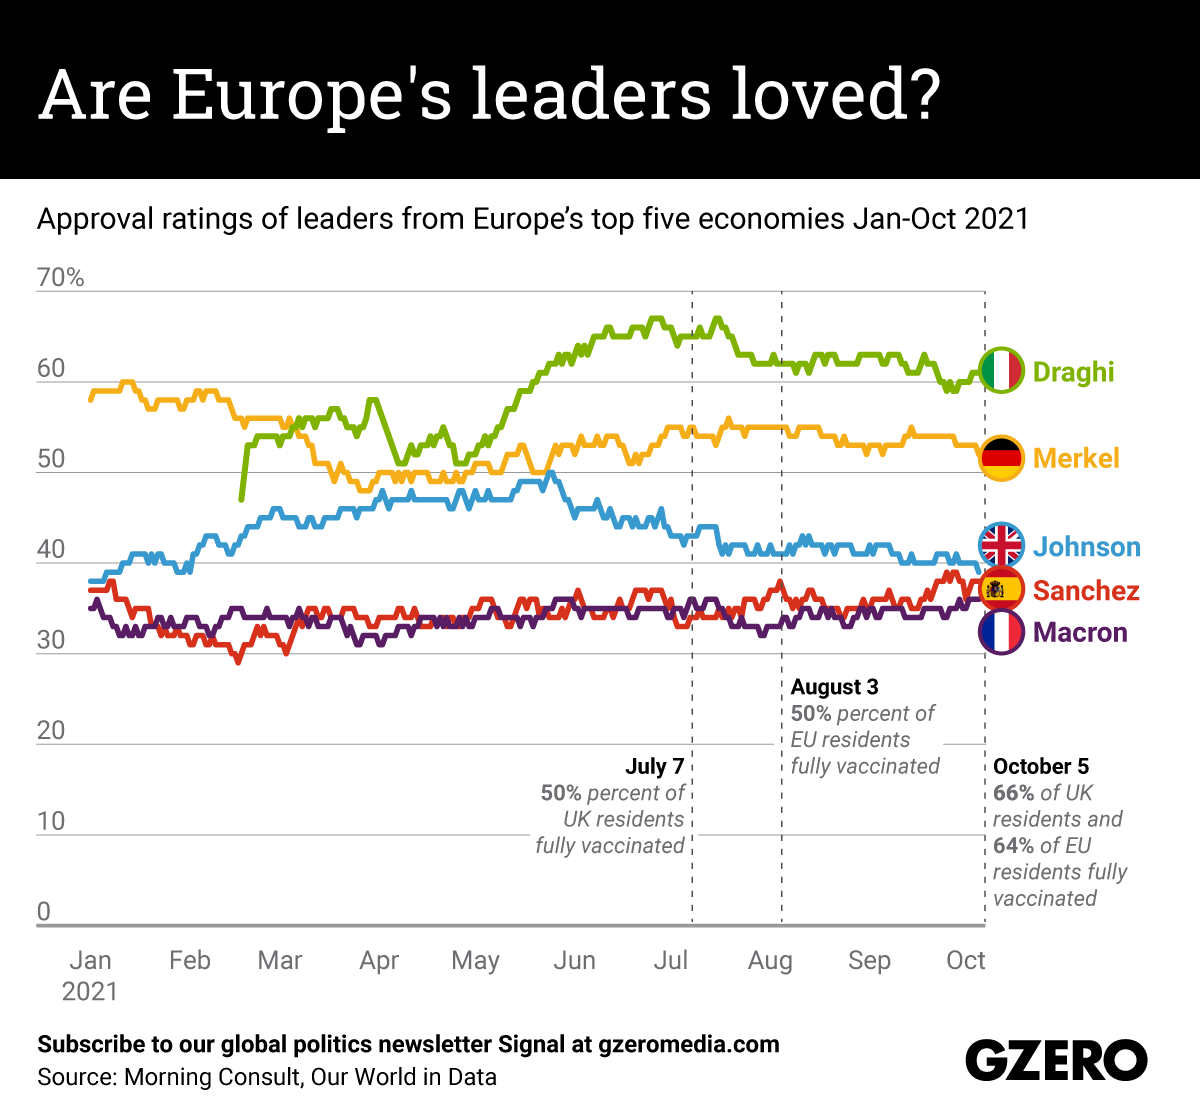 Approval ratings of leaders from Europe's top five economies Jan-Oct 2021